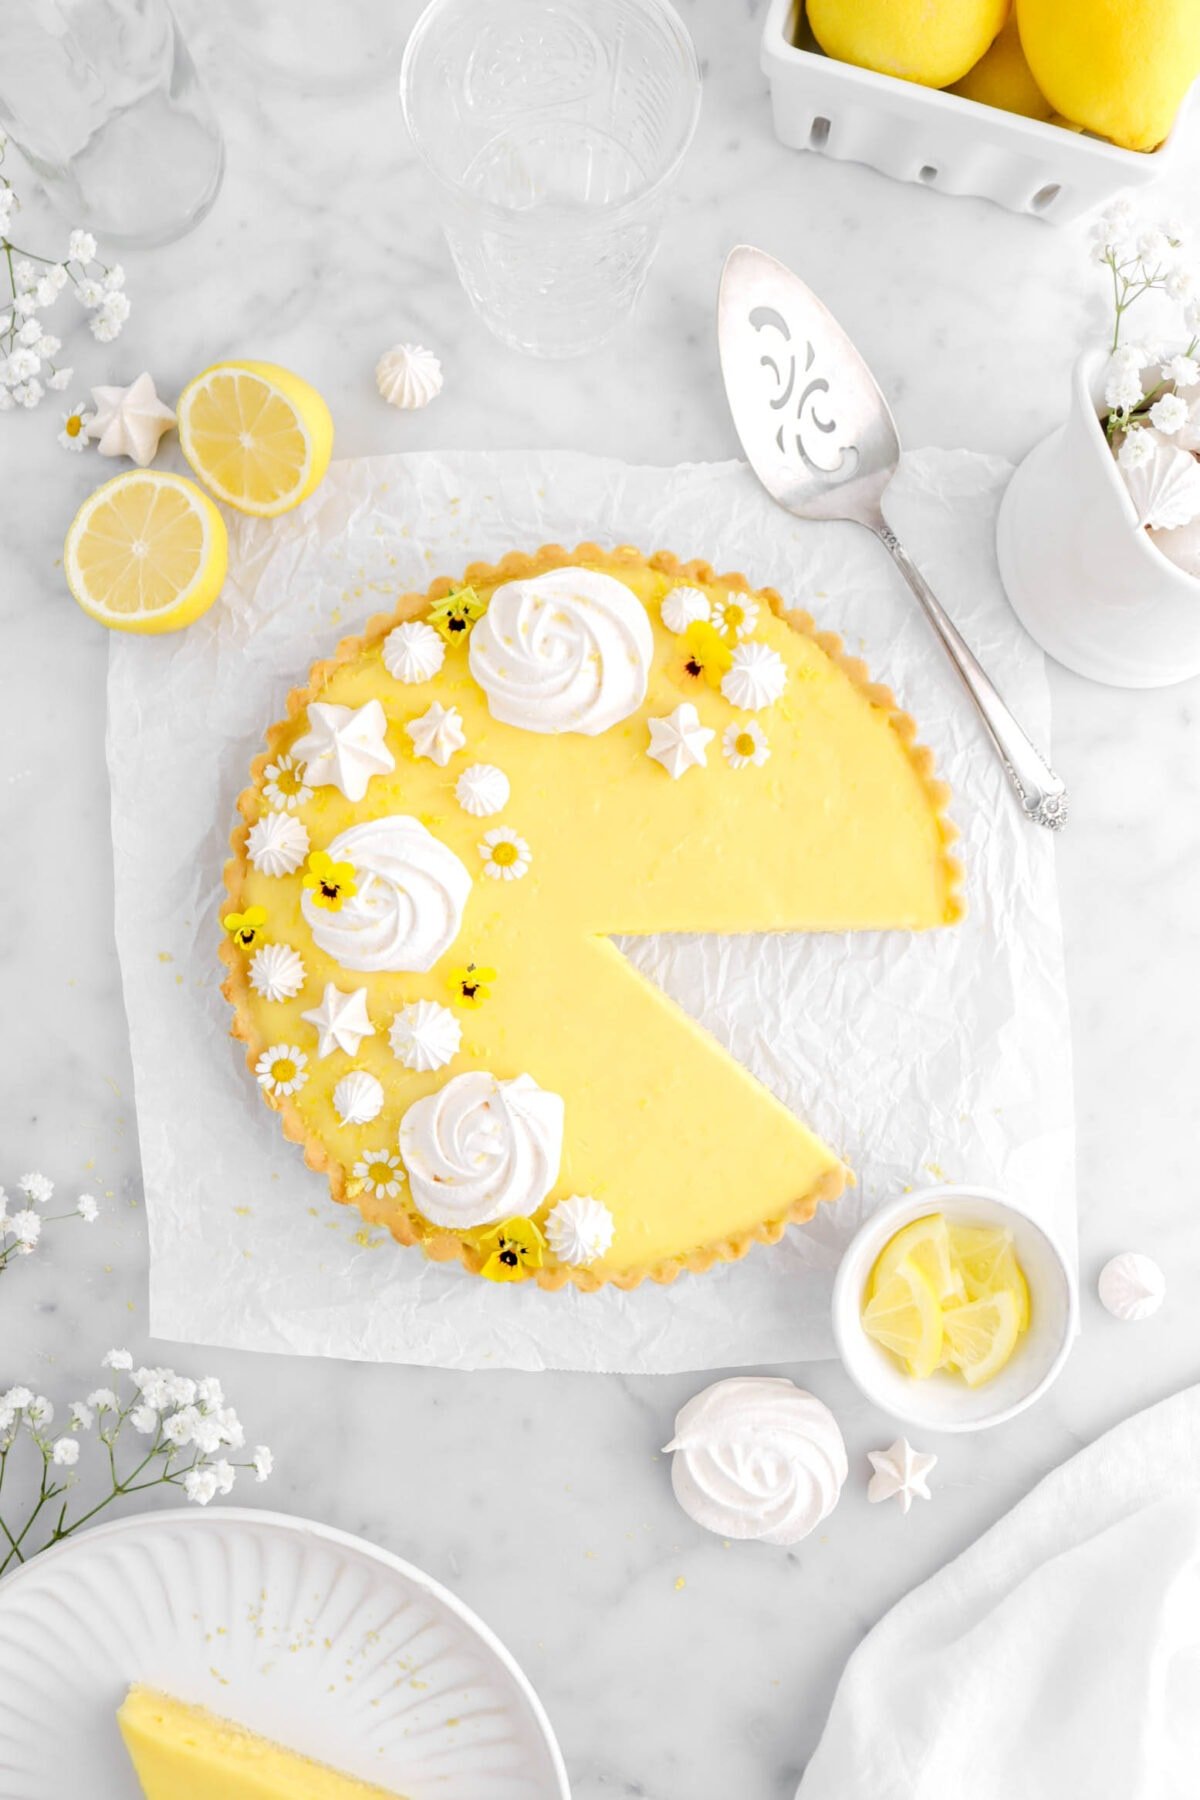 overhead shot of lemon tart with slice missing on parchment paper with lemons around, slice on white plate beside, and white flowers around on marble surface.